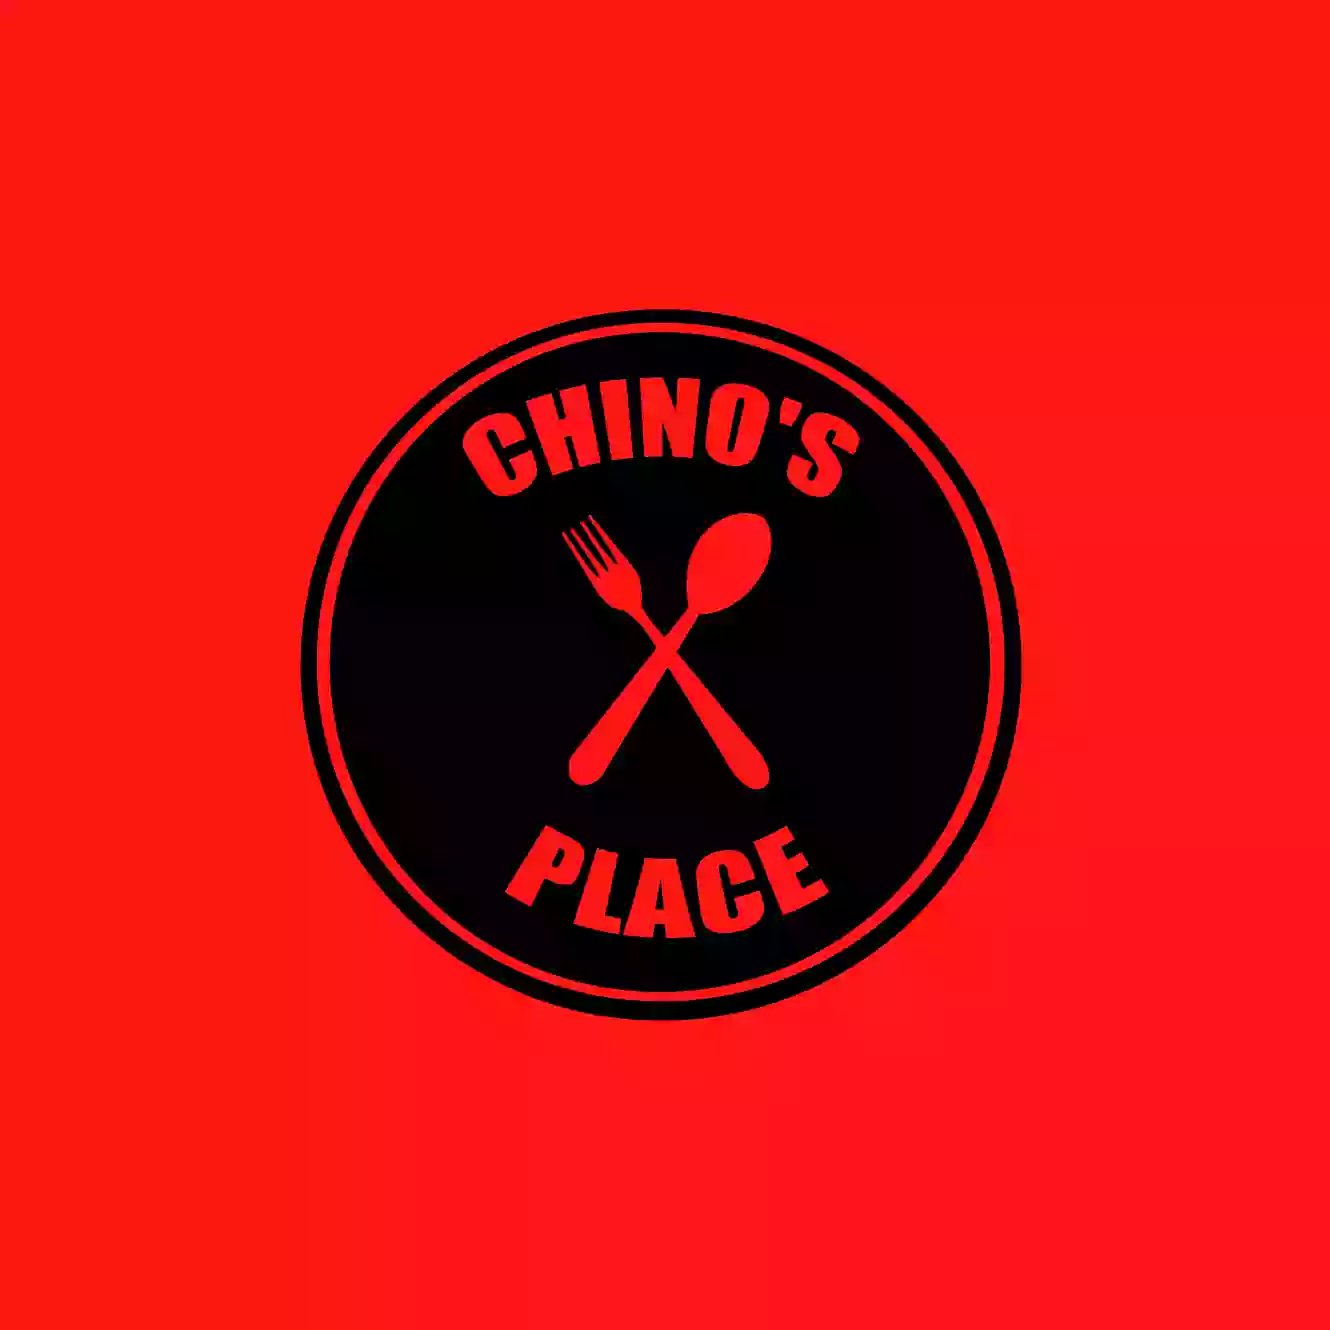 Chino’s Place